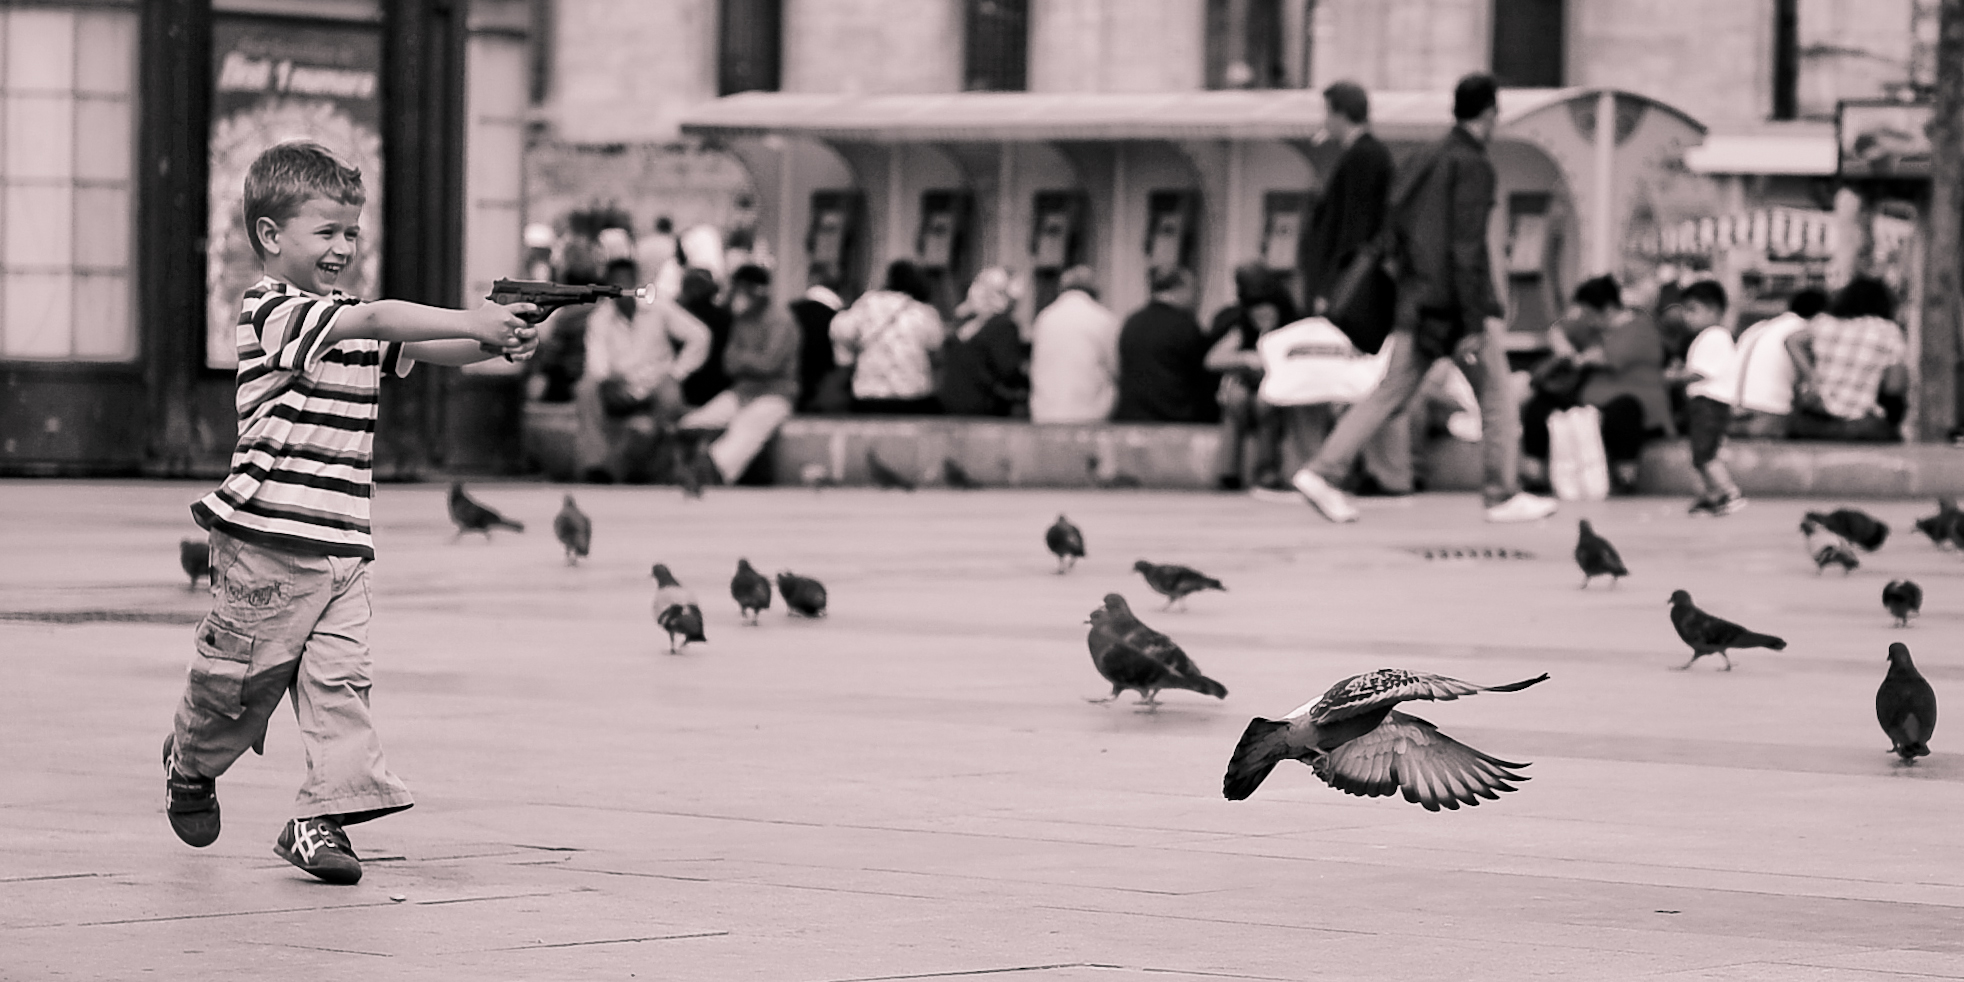 Bird Chase in Istanbul